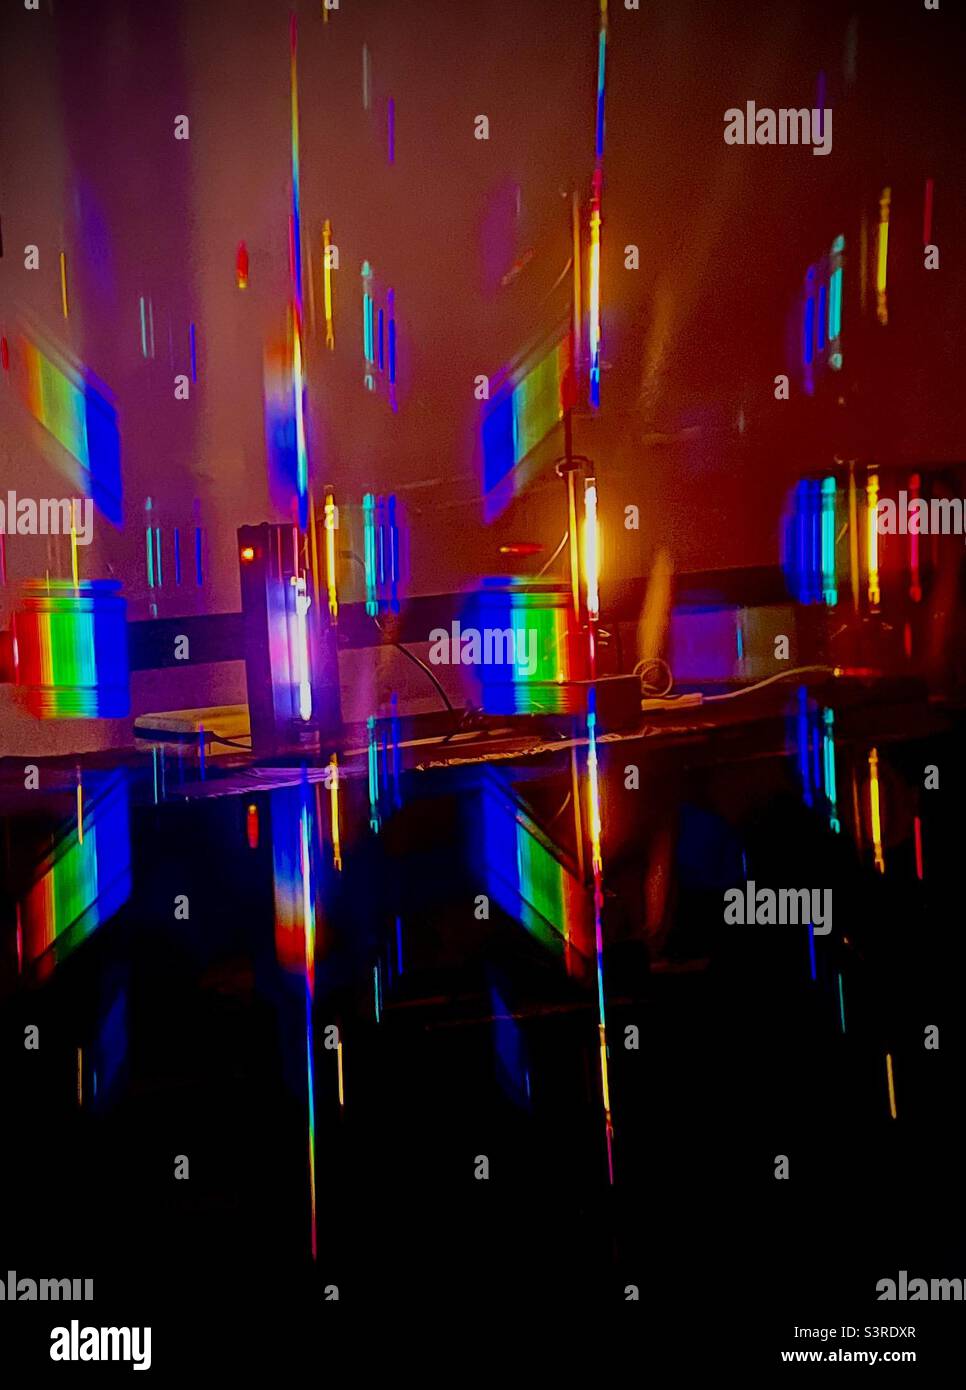 Spectral display. Gas discharge tubes and light fixture display a rainbow of colors. Stock Photo